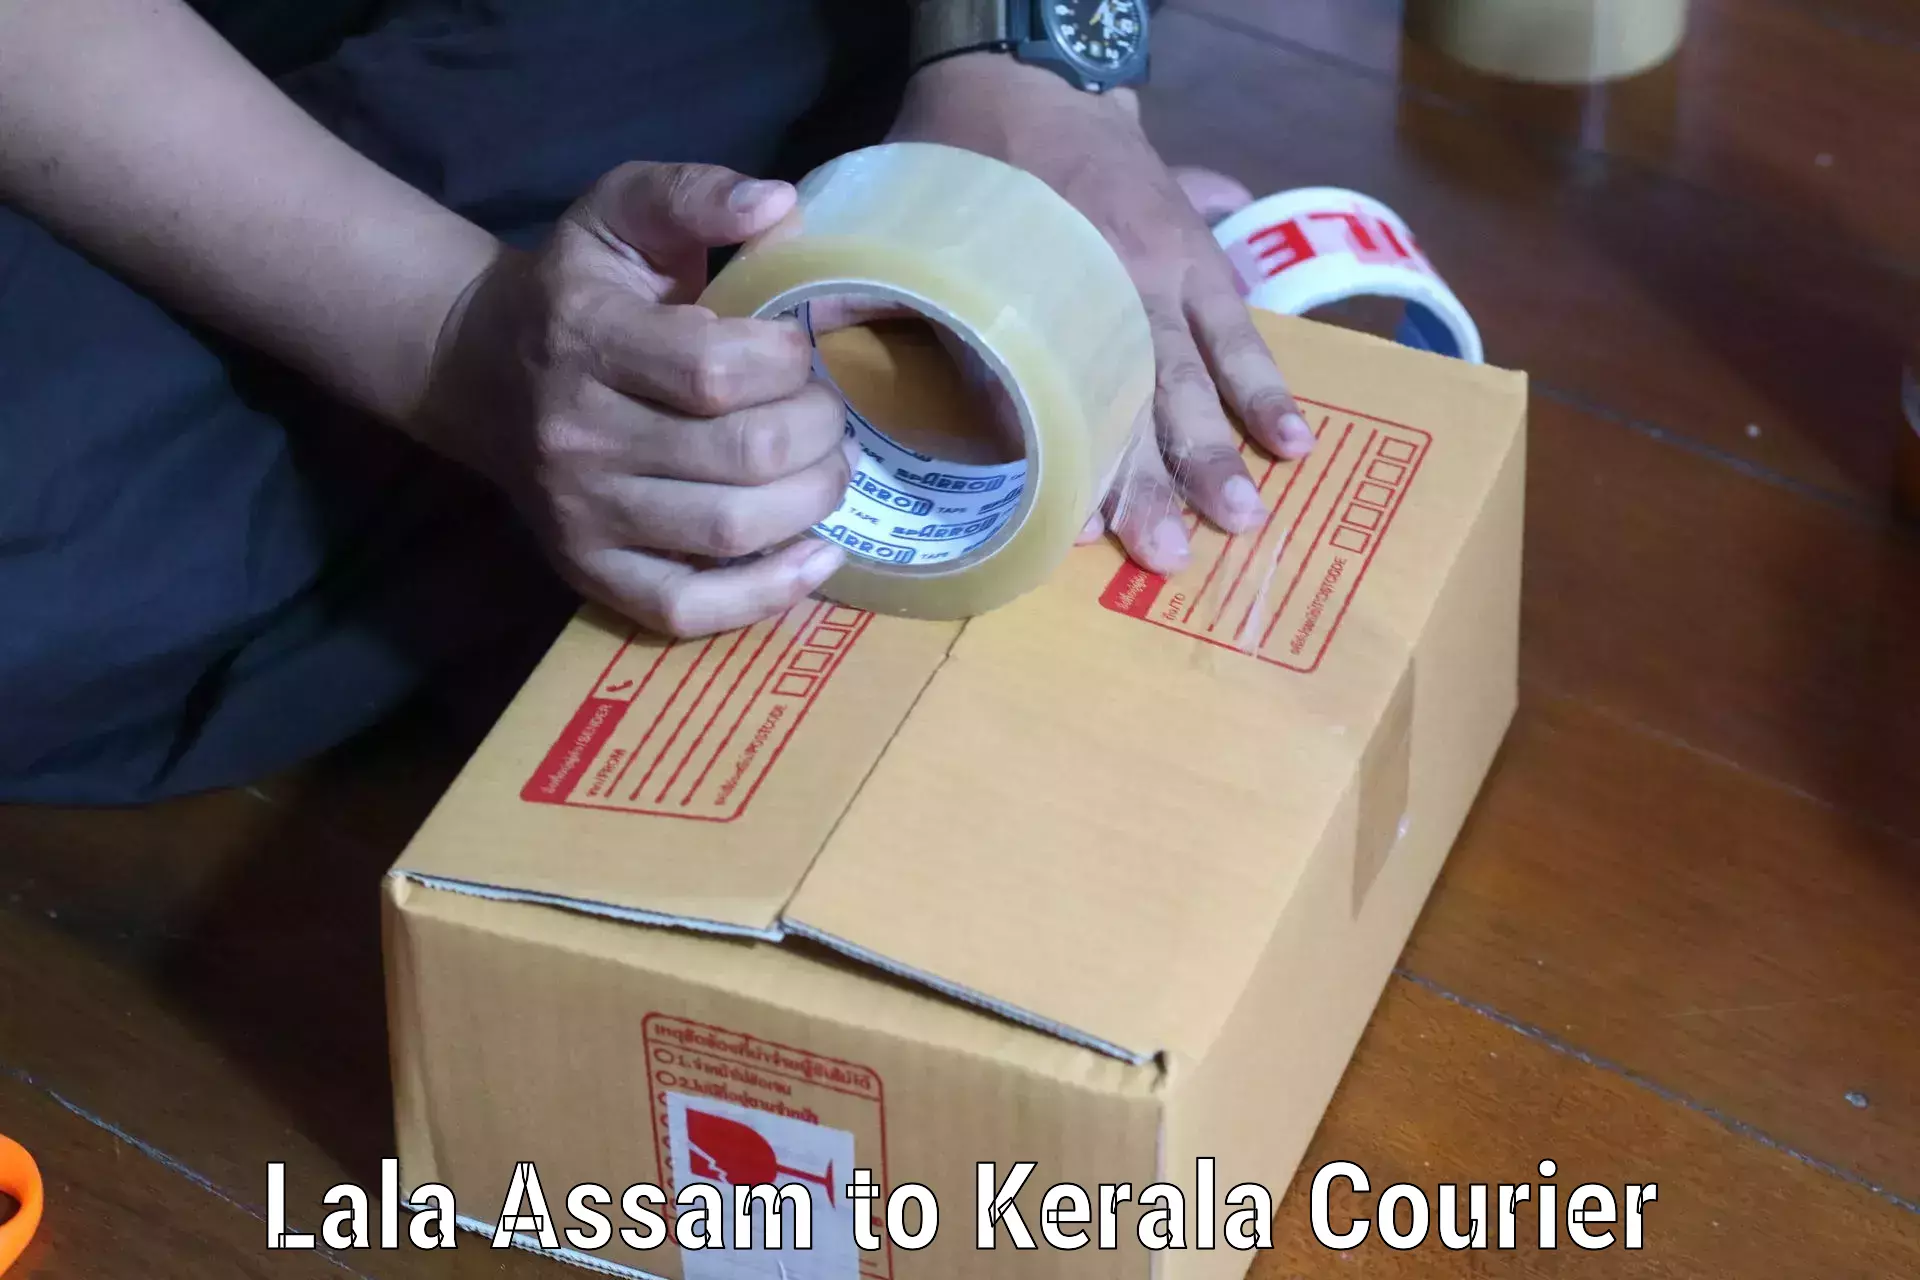 Overnight delivery services Lala Assam to Kerala